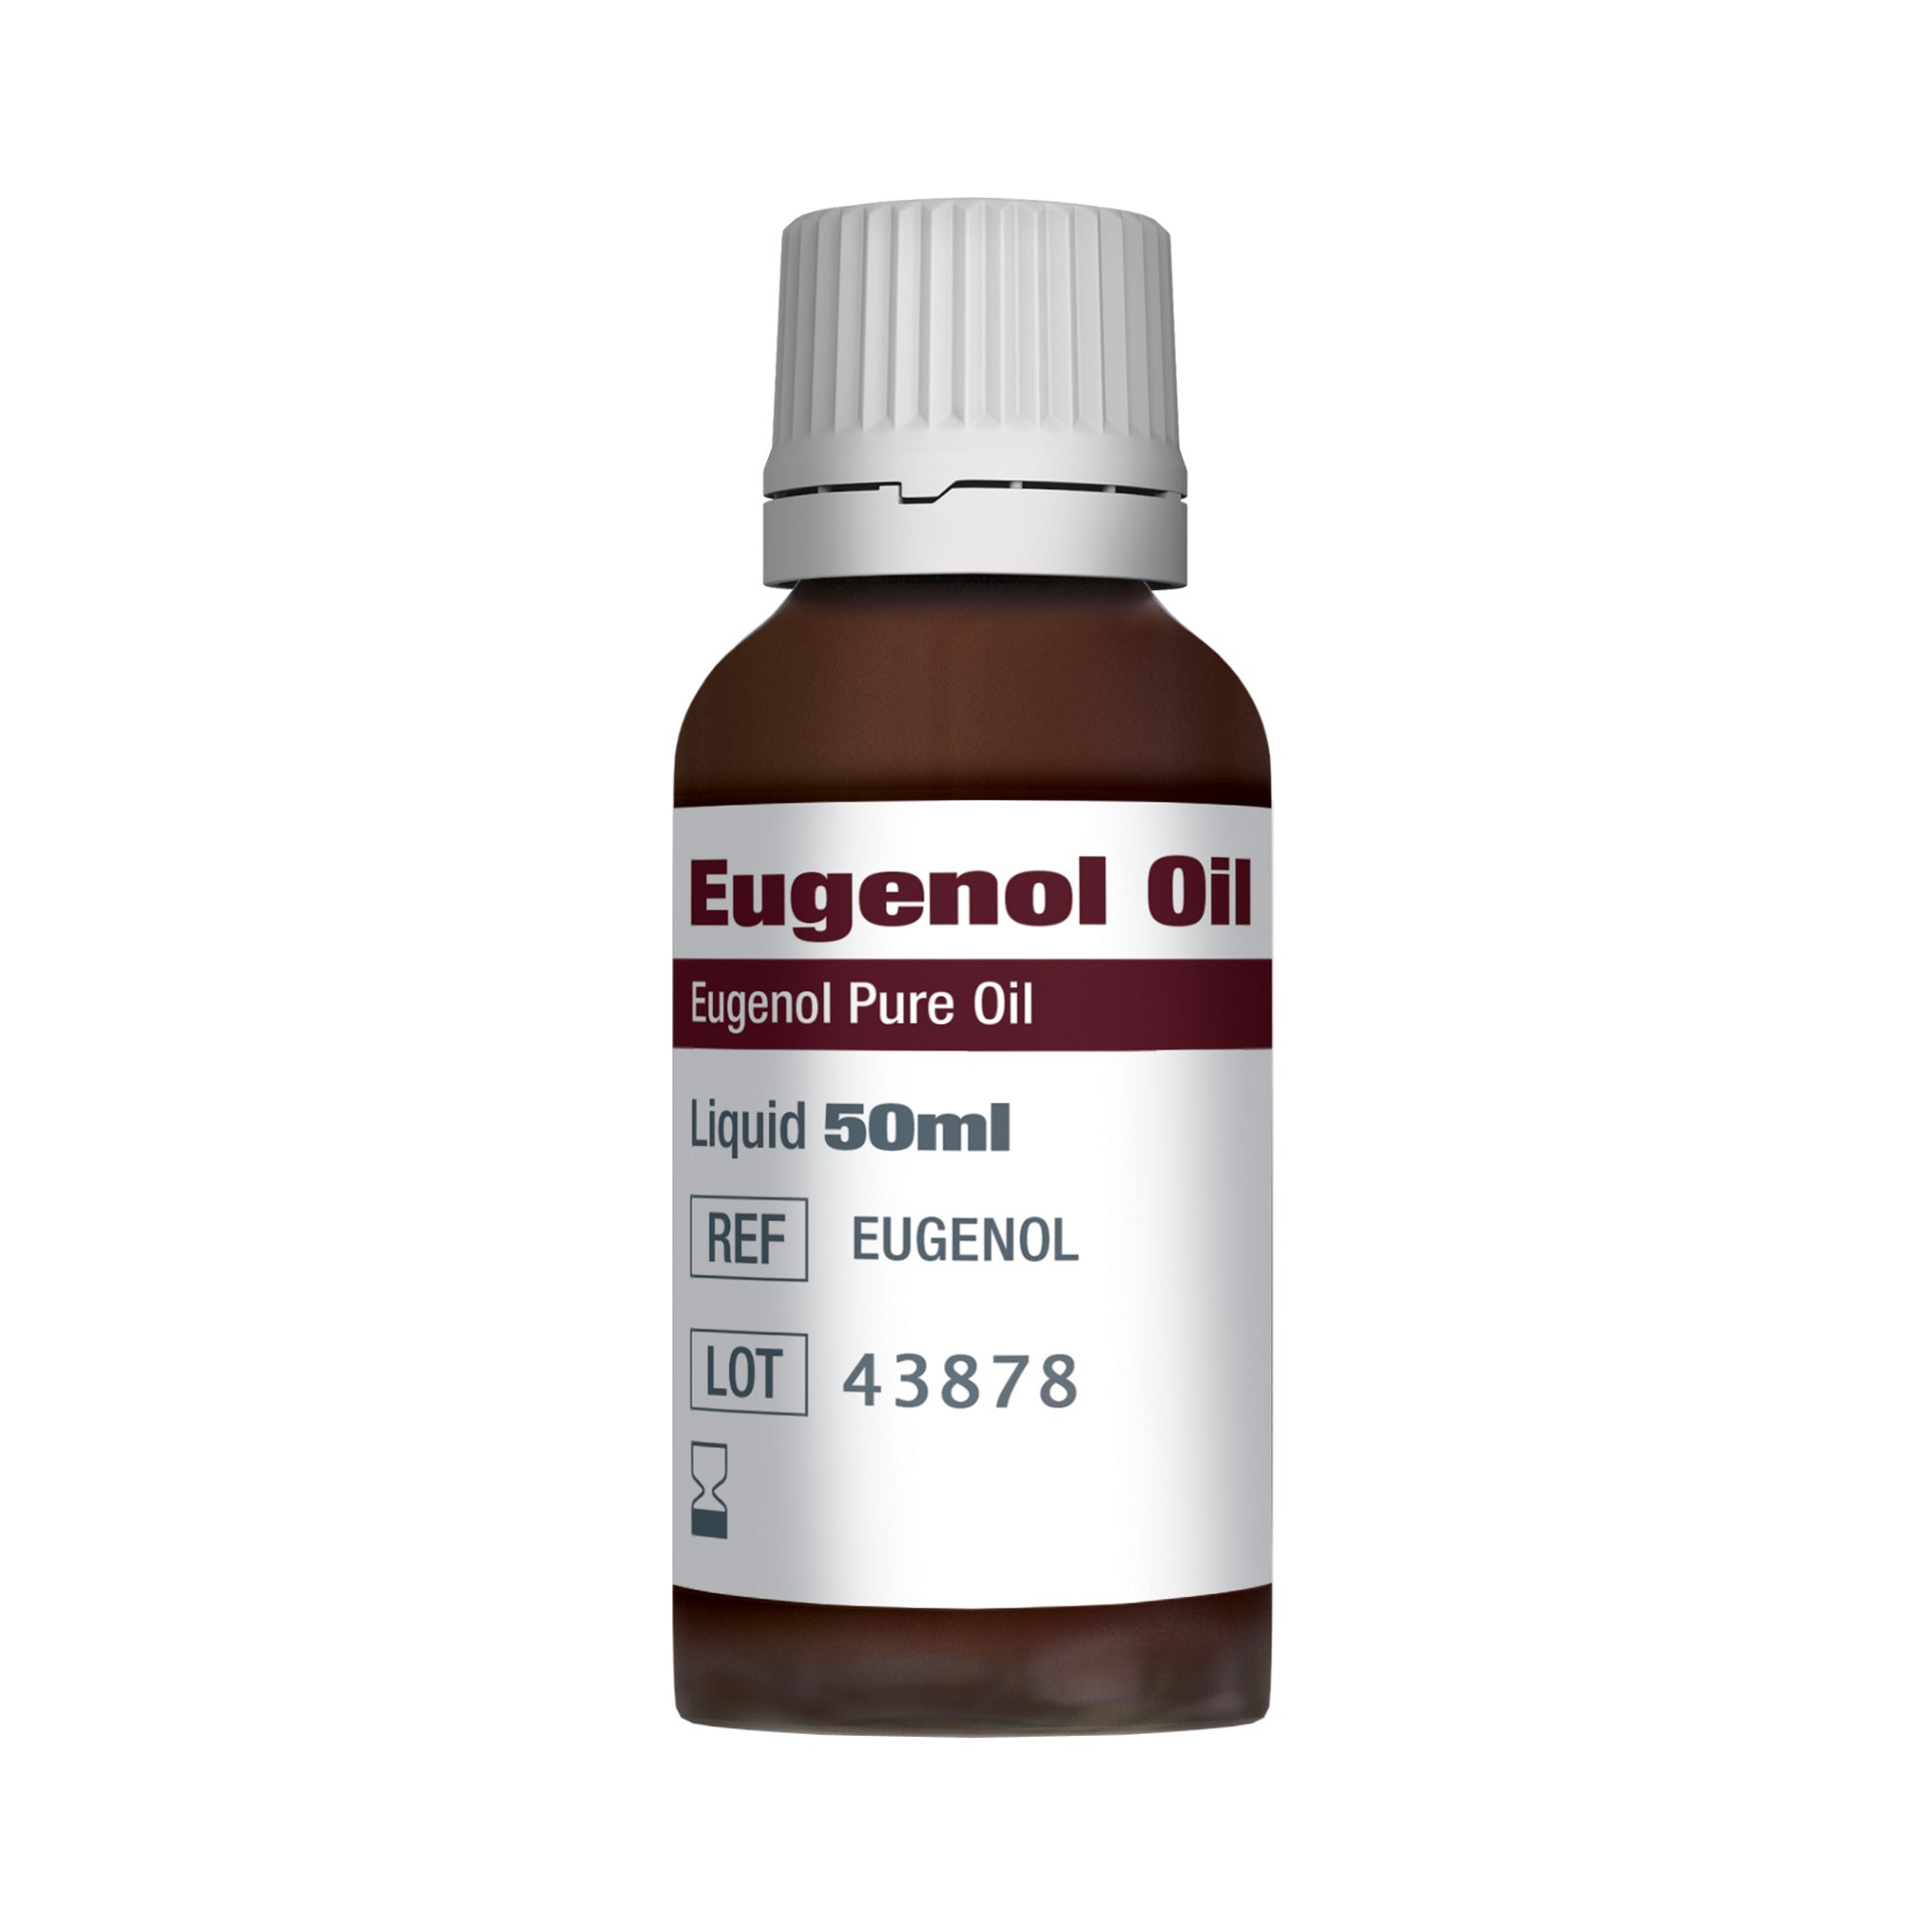 DSI Pure Eugenol Oil For Dental Applications And Pain Relief 50ml 1.7oz